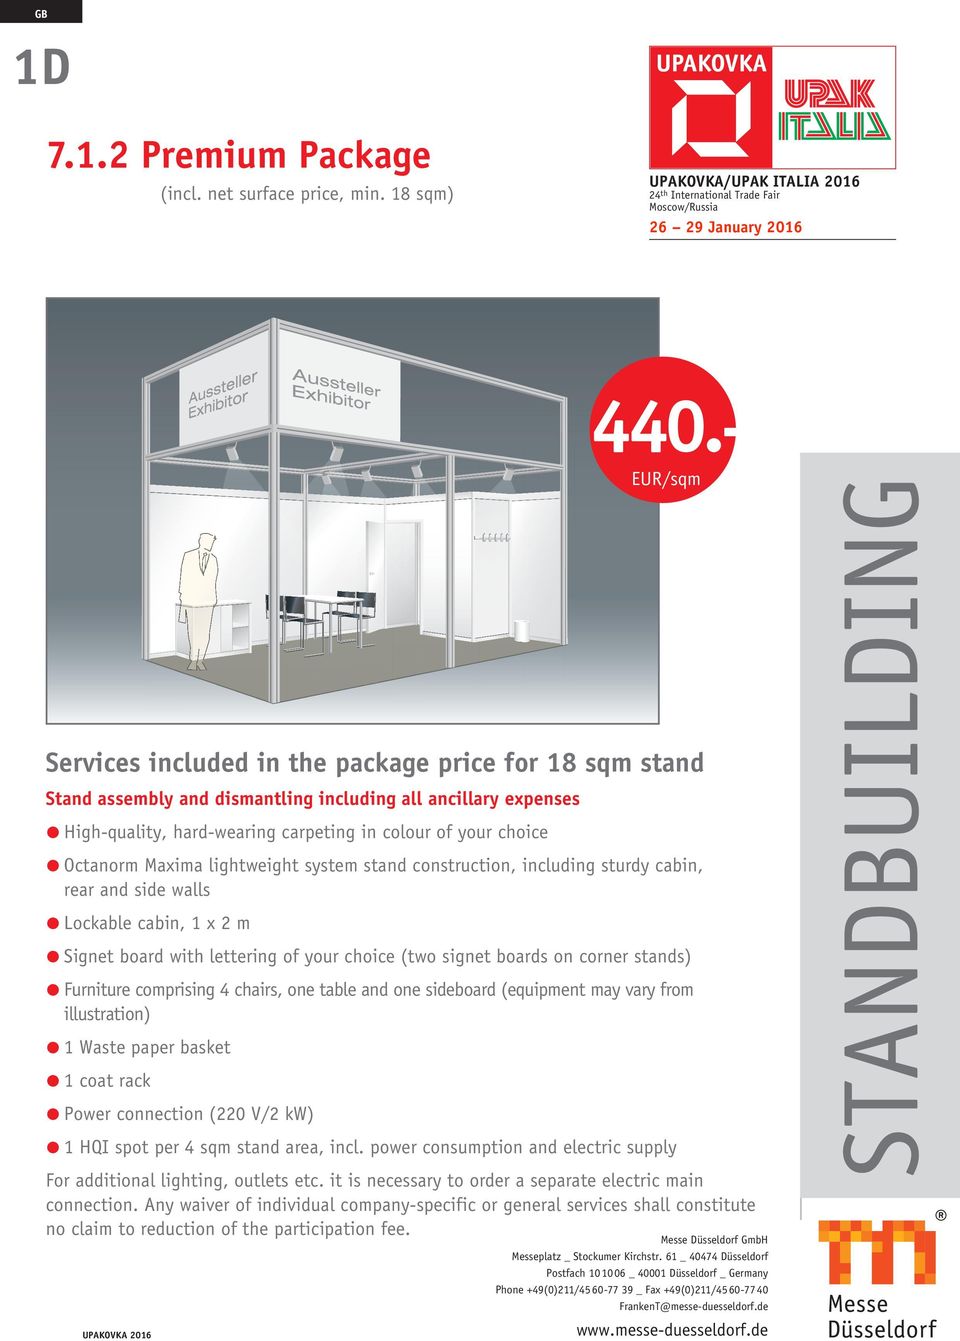 Maxima lightweight system stand construction, including sturdy cabin, rear and side walls Lockable cabin, 1 x 2 m Signet board with lettering of your choice (two signet boards on corner stands)